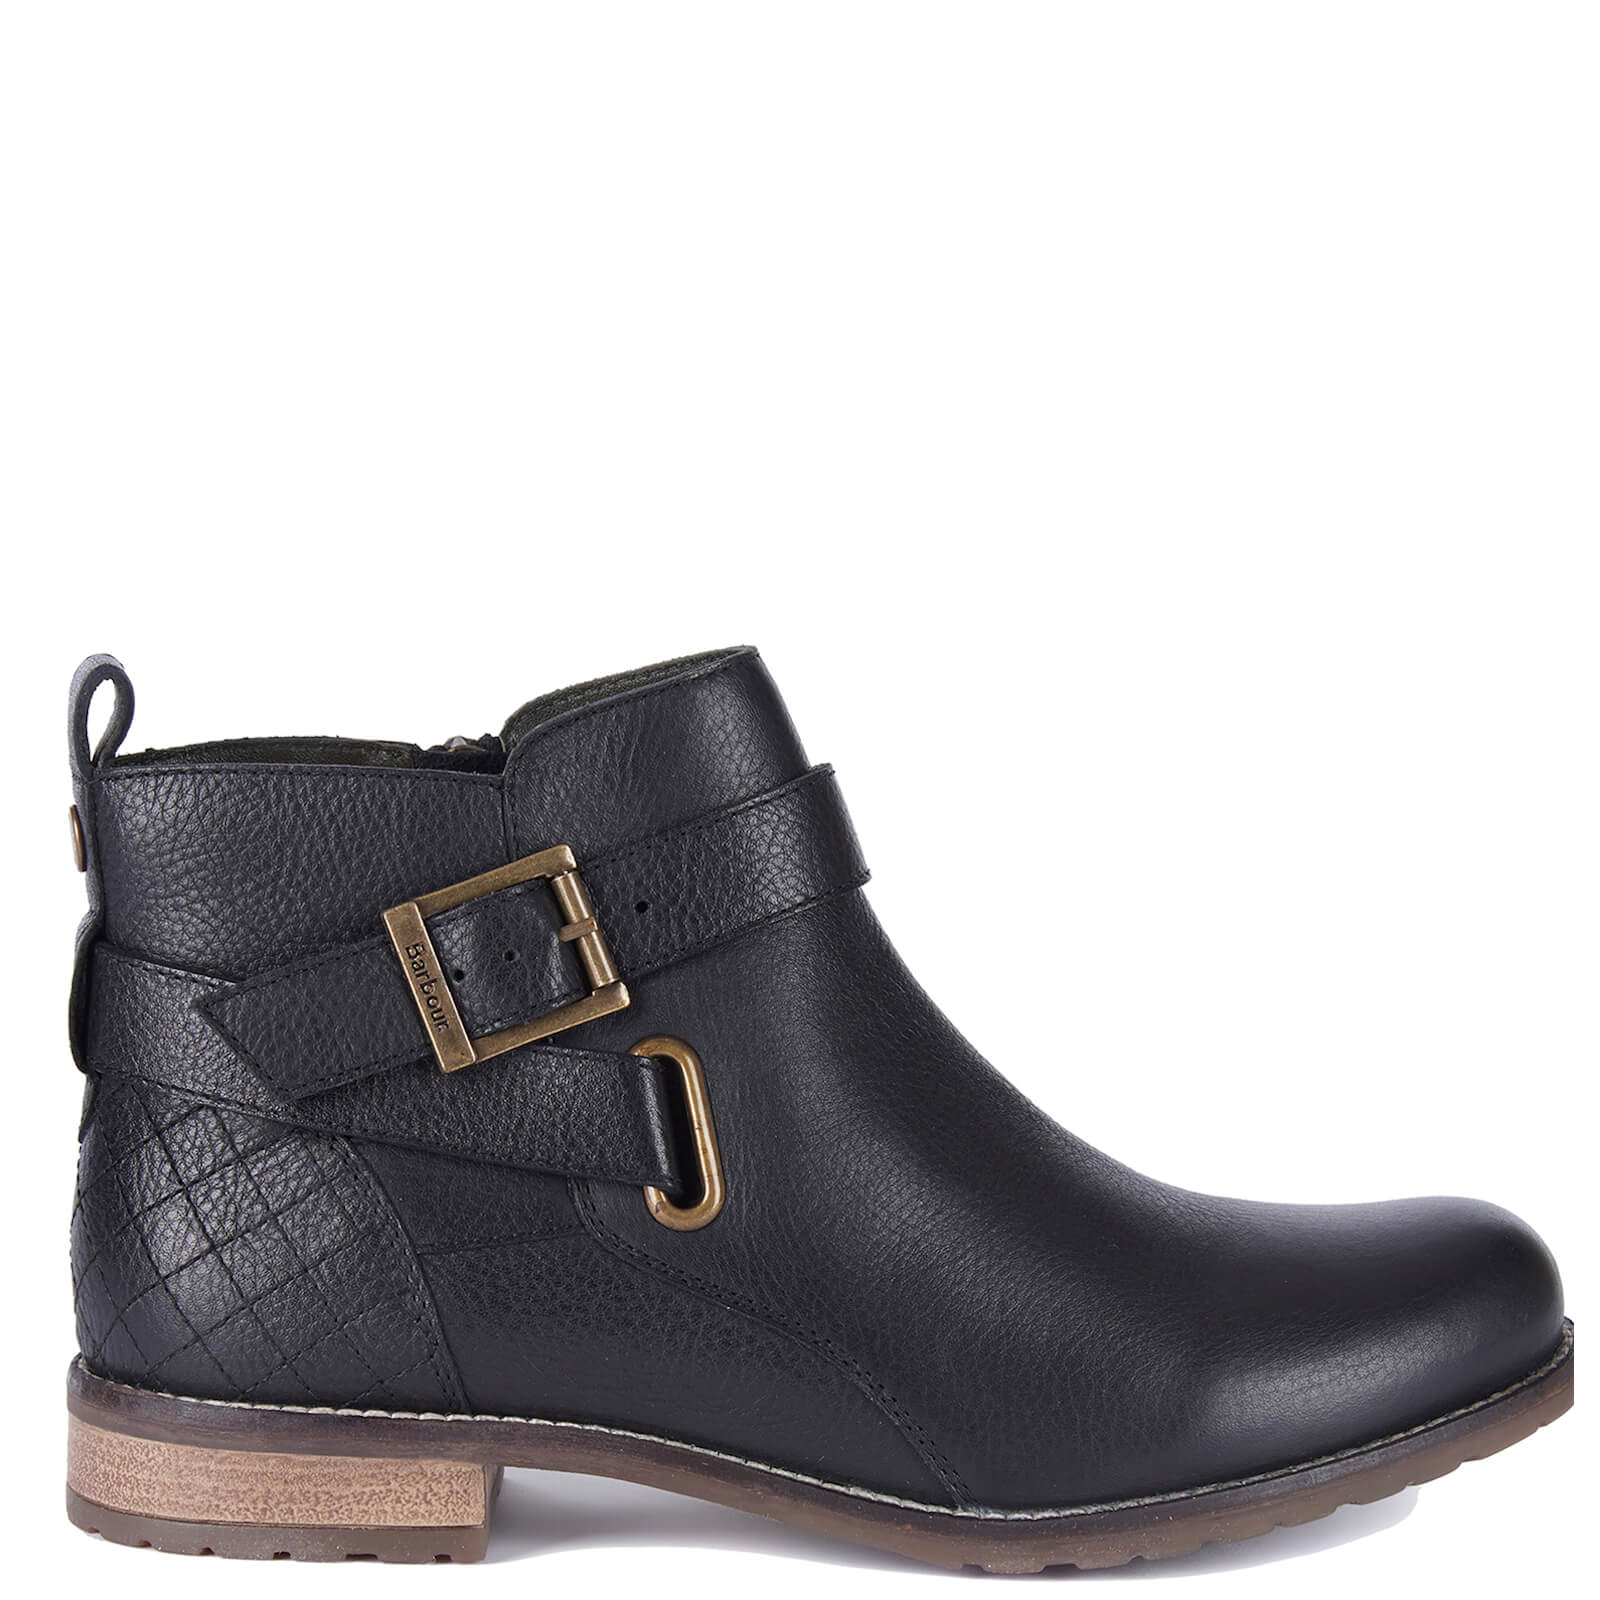 Barbour Women's Jane Ankle Boots - Black - UK 3